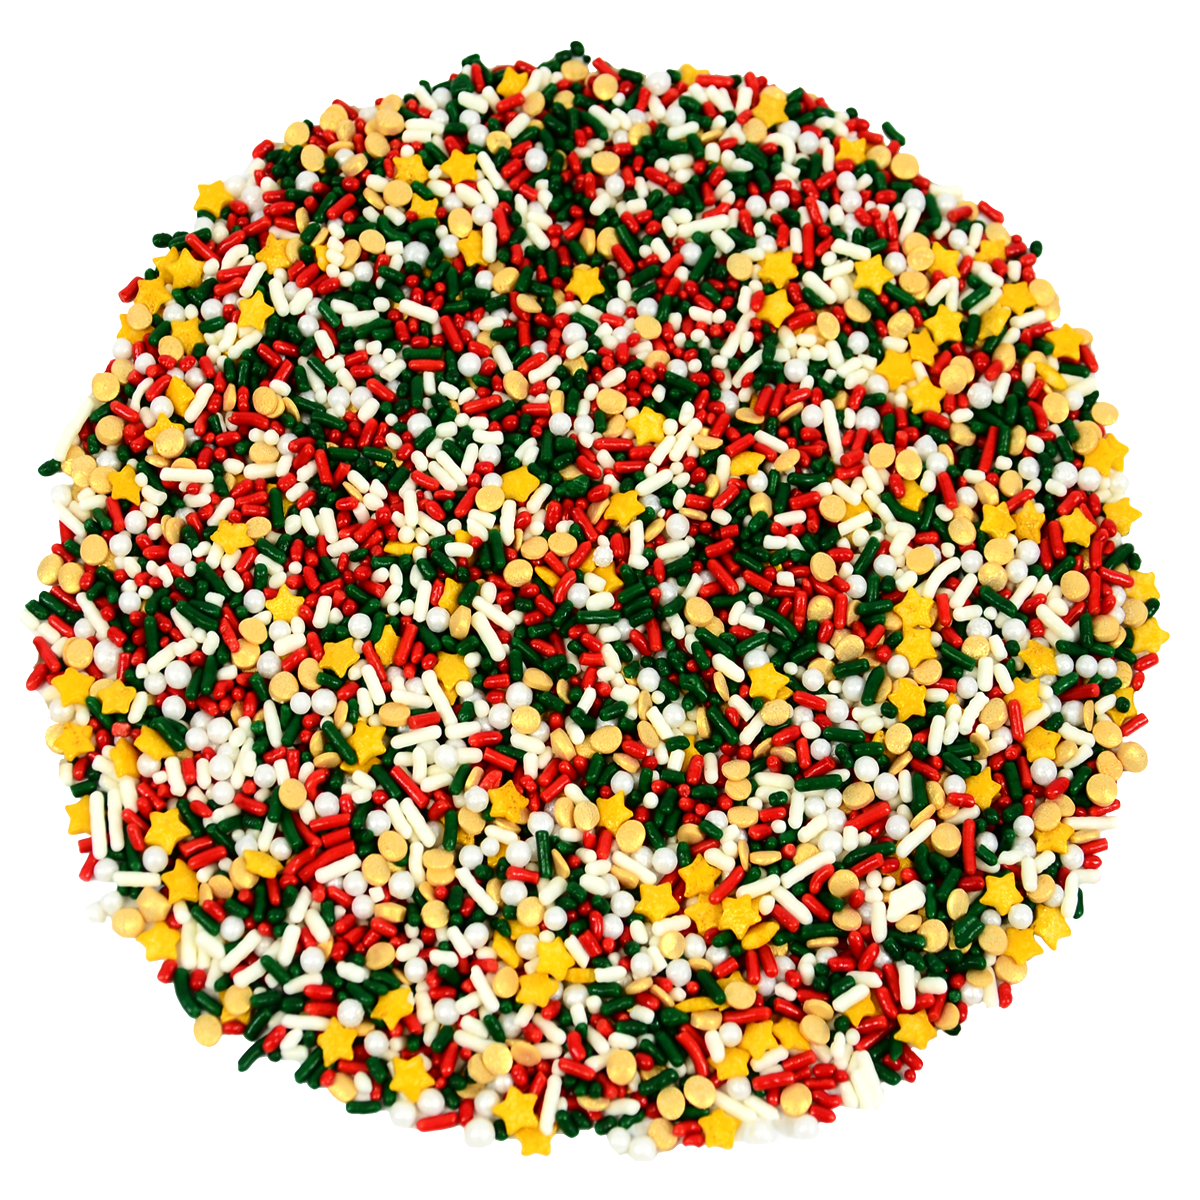 A Classic Christmas in Gold Sprinkle Mix 3.4oz Bottle